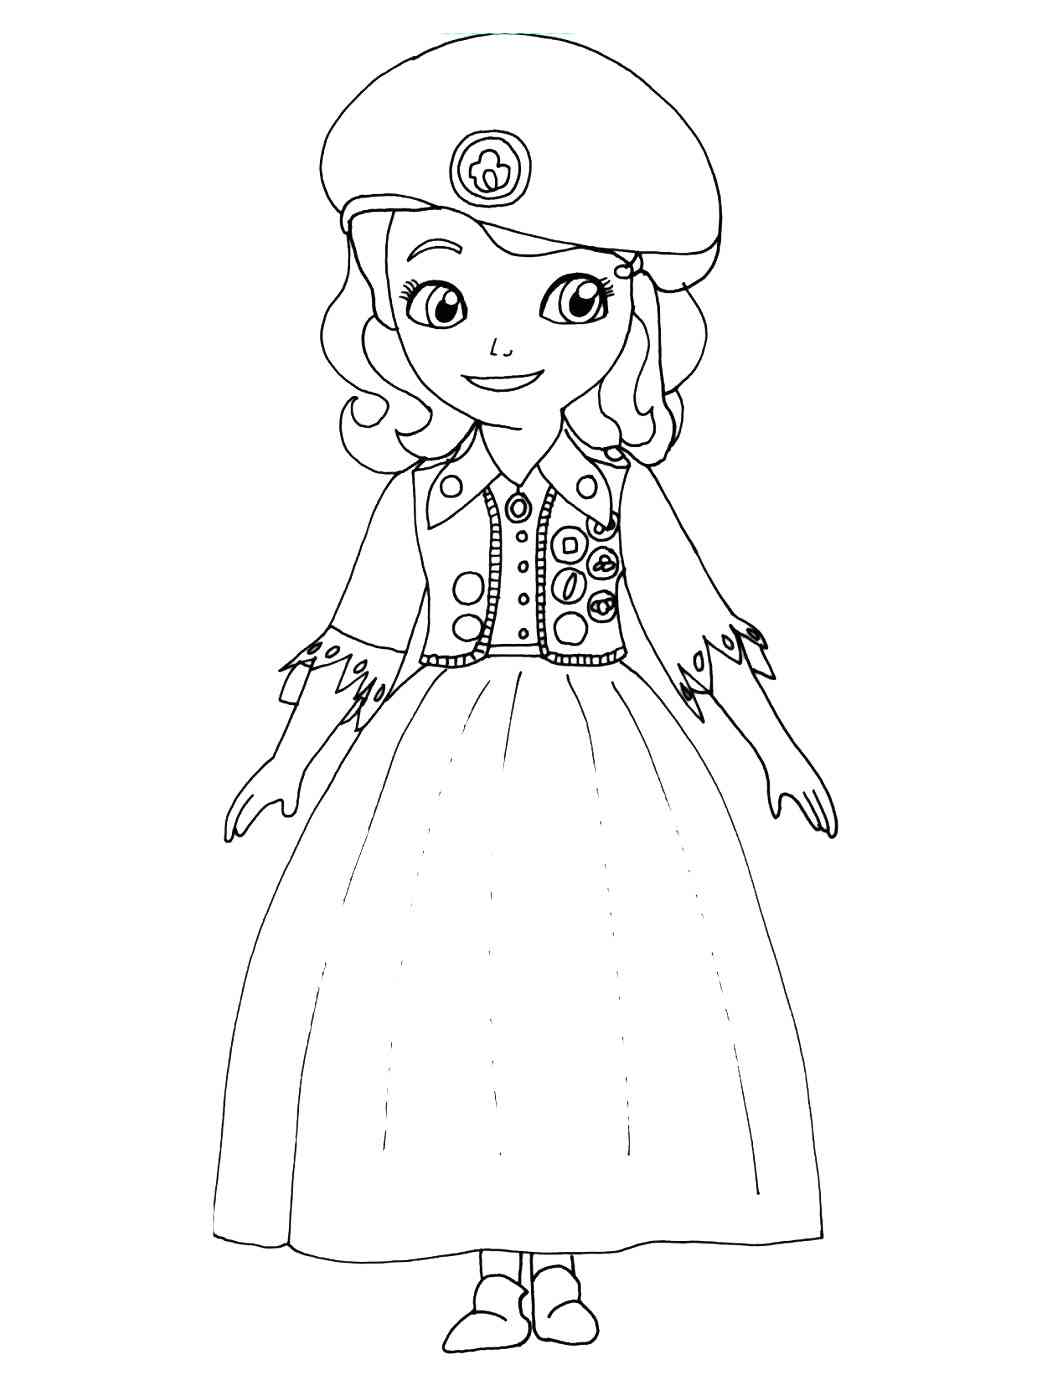 Sofia the First coloring pages. Free Printable Sofia the First ...